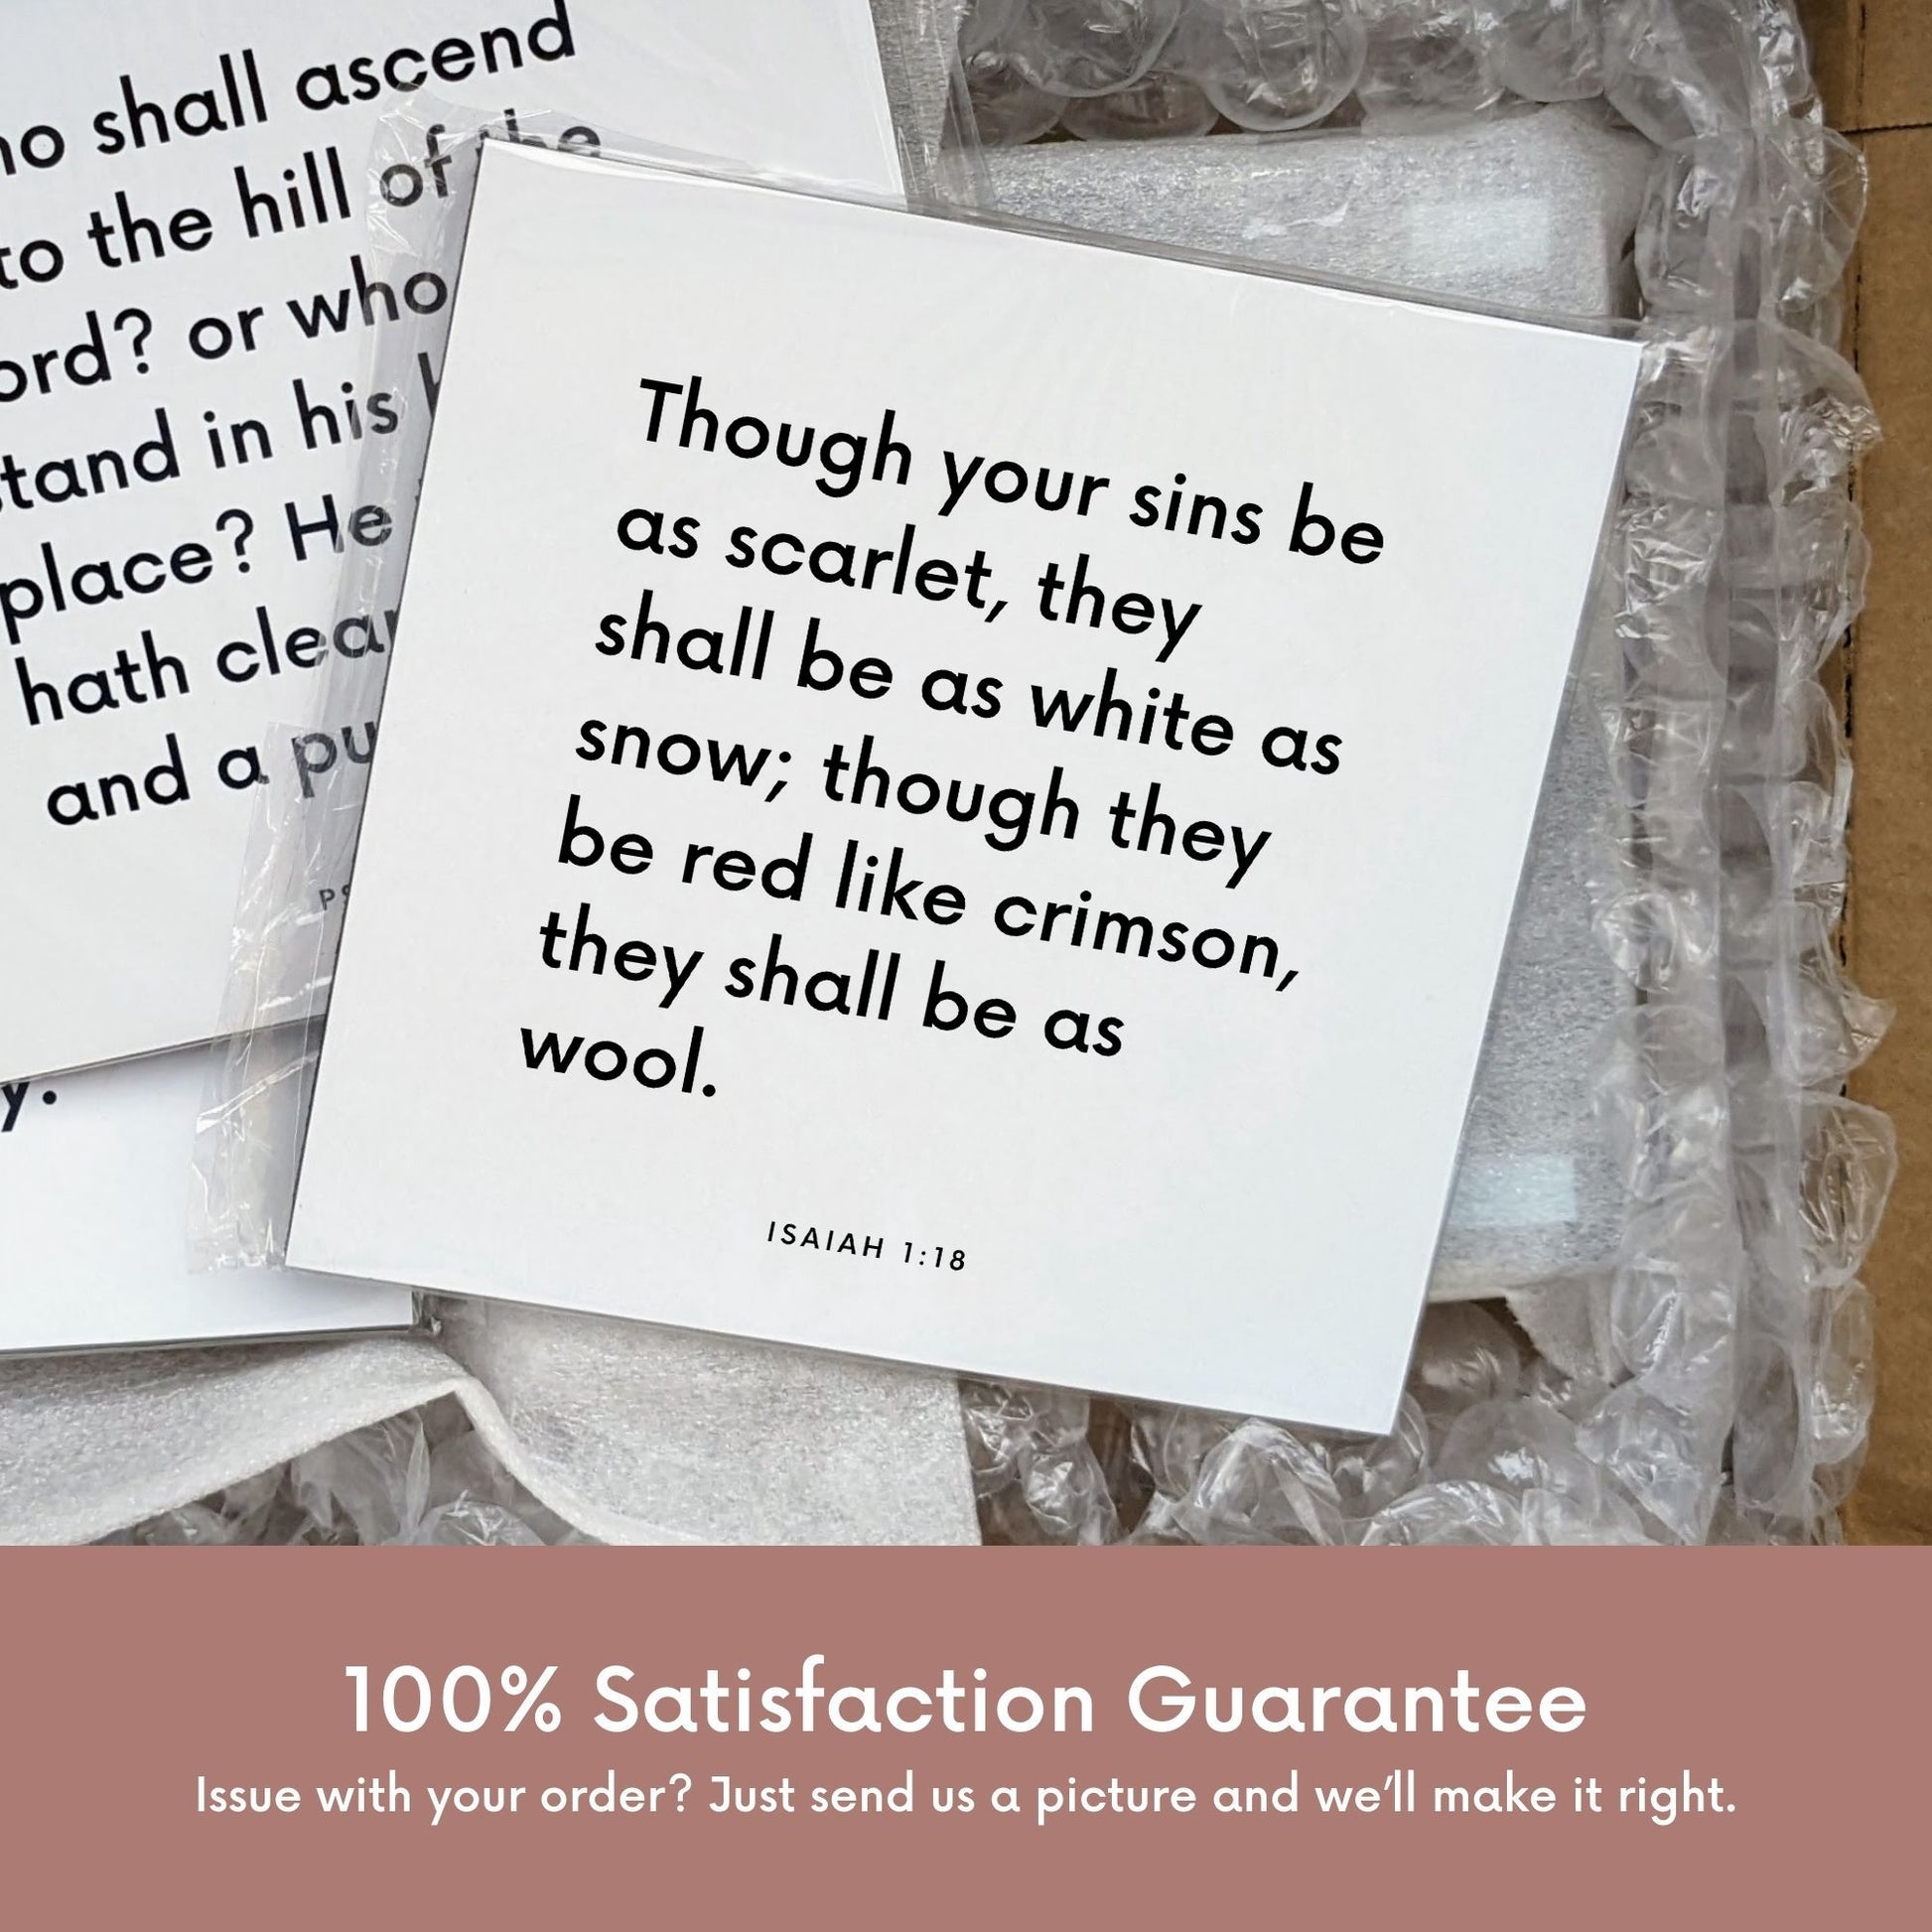 Shipping materials for scripture tile of Isaiah 1:18 - "Though your sins be as scarlet, they shall be white as snow"